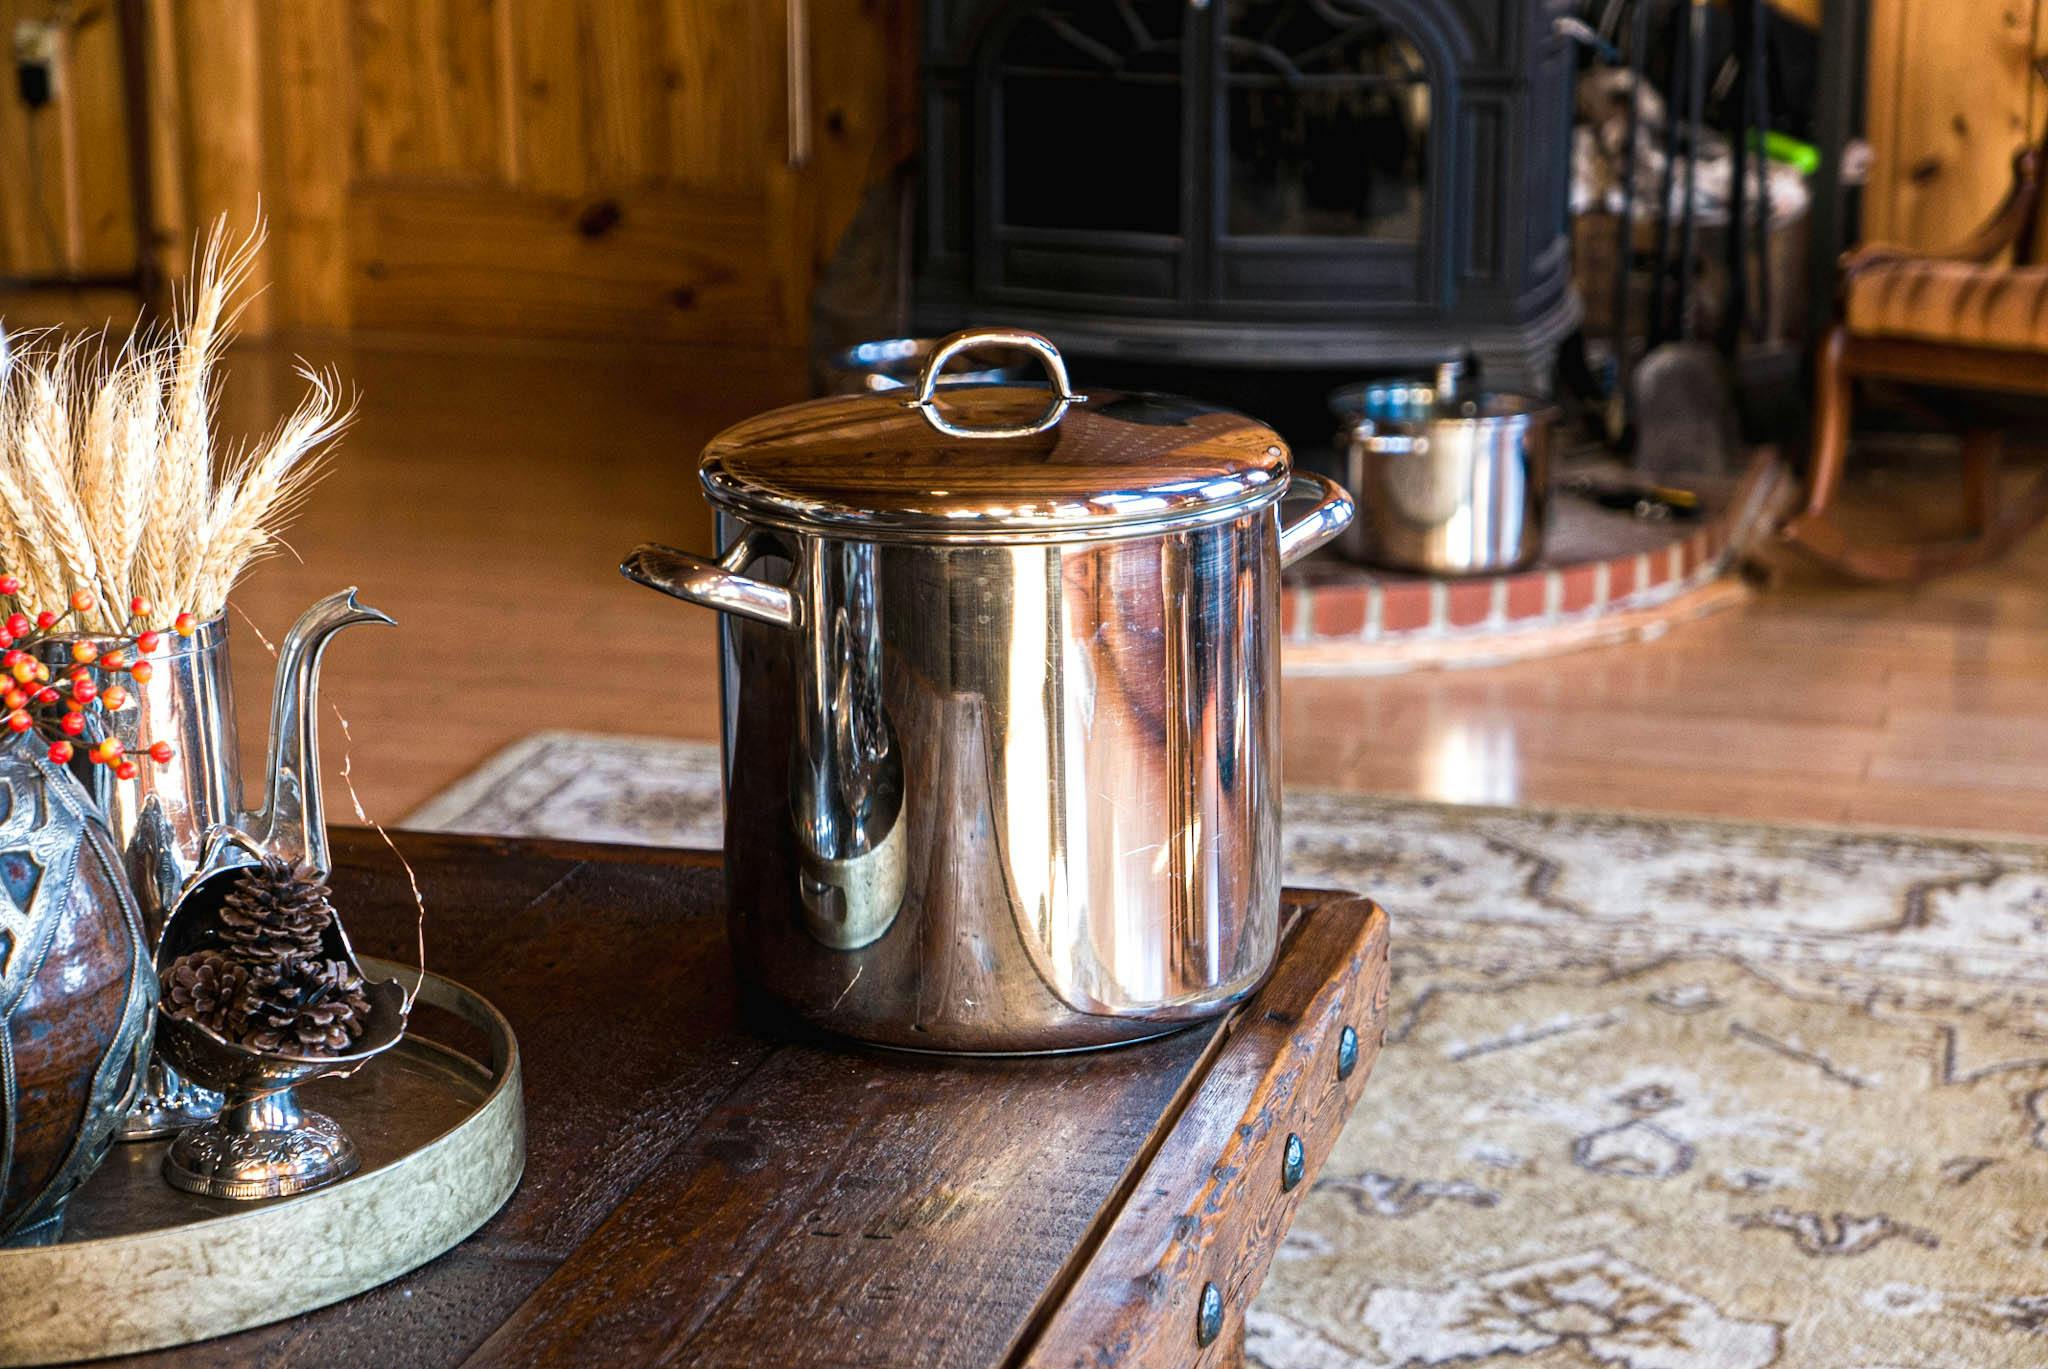 Which pot is the best: Dutch oven vs stock pot?